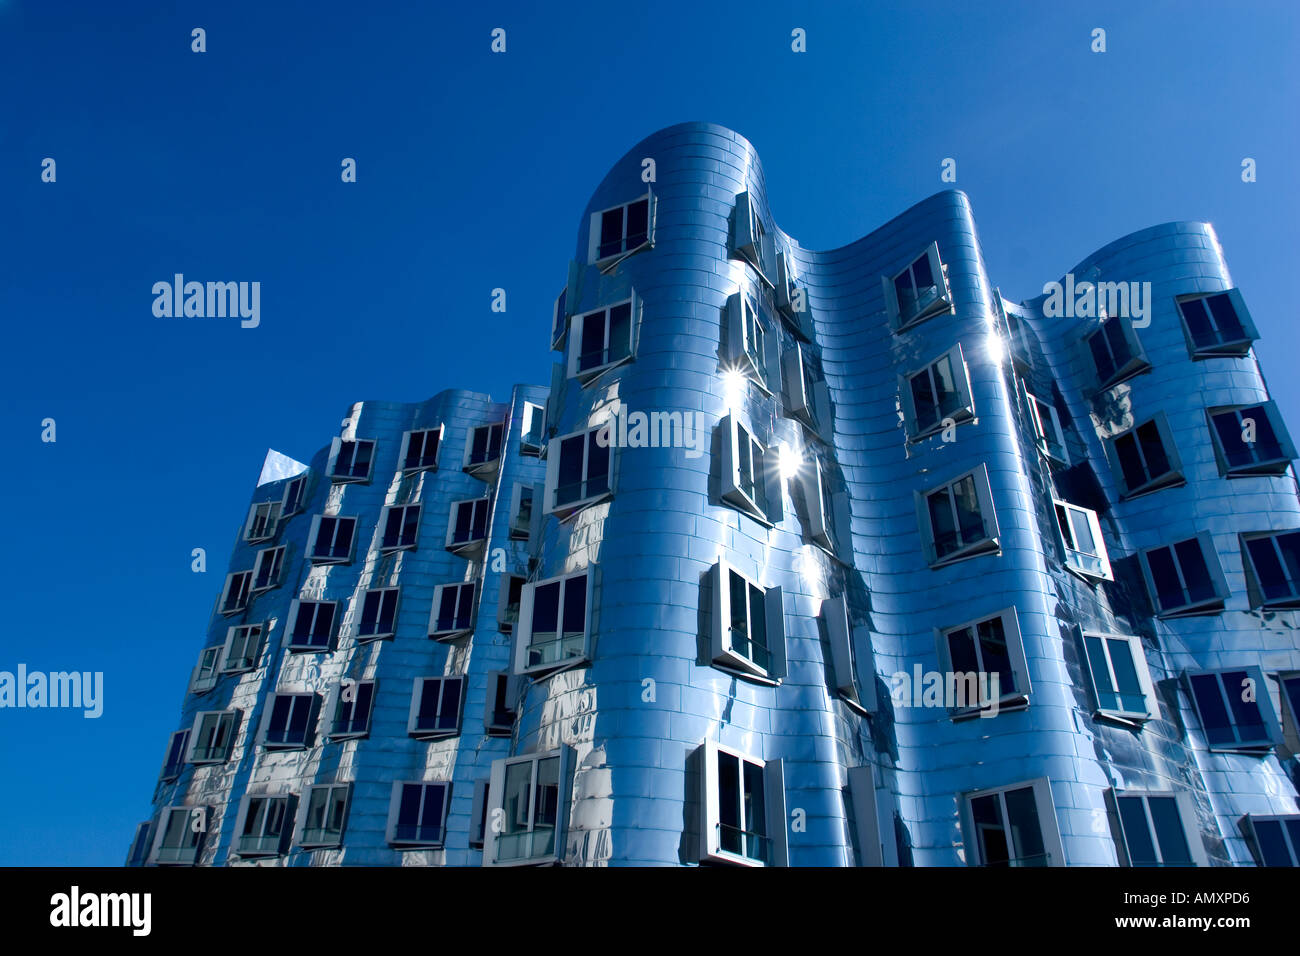 The Neuer Zollhof building by Frank Gehry at the Medienhafen Media Harbour, Dusseldorf, Germany. Stock Photo